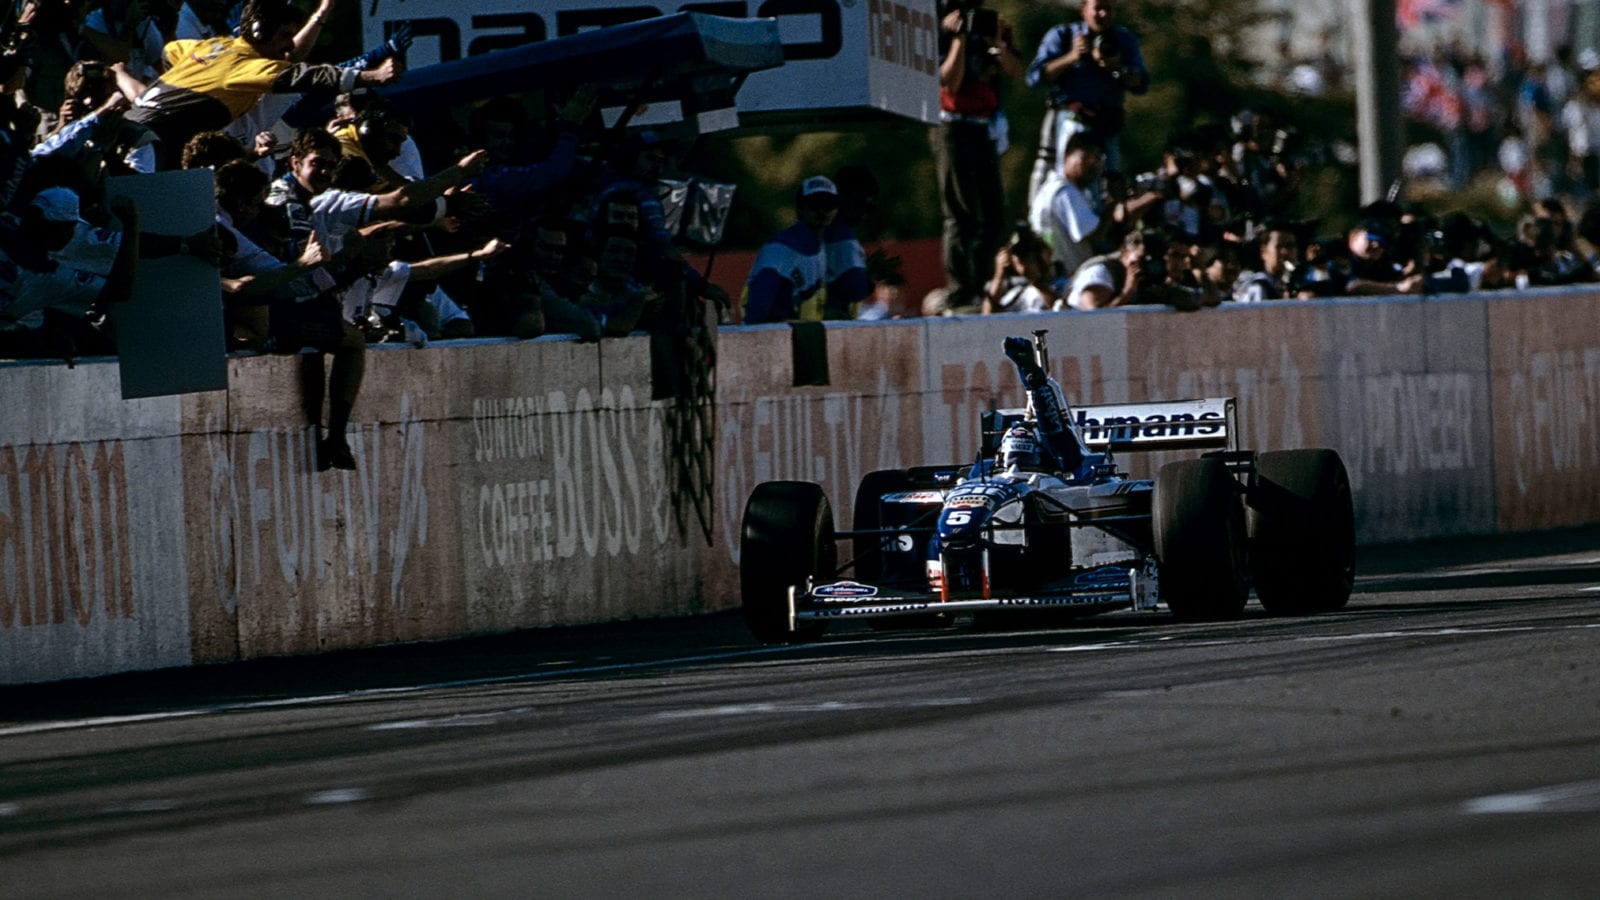 Damon Hill crosses the finish line at the 1996 Japanese Grand Prix at Suzuka to claim the Formula 1 Drivers Wold Championship